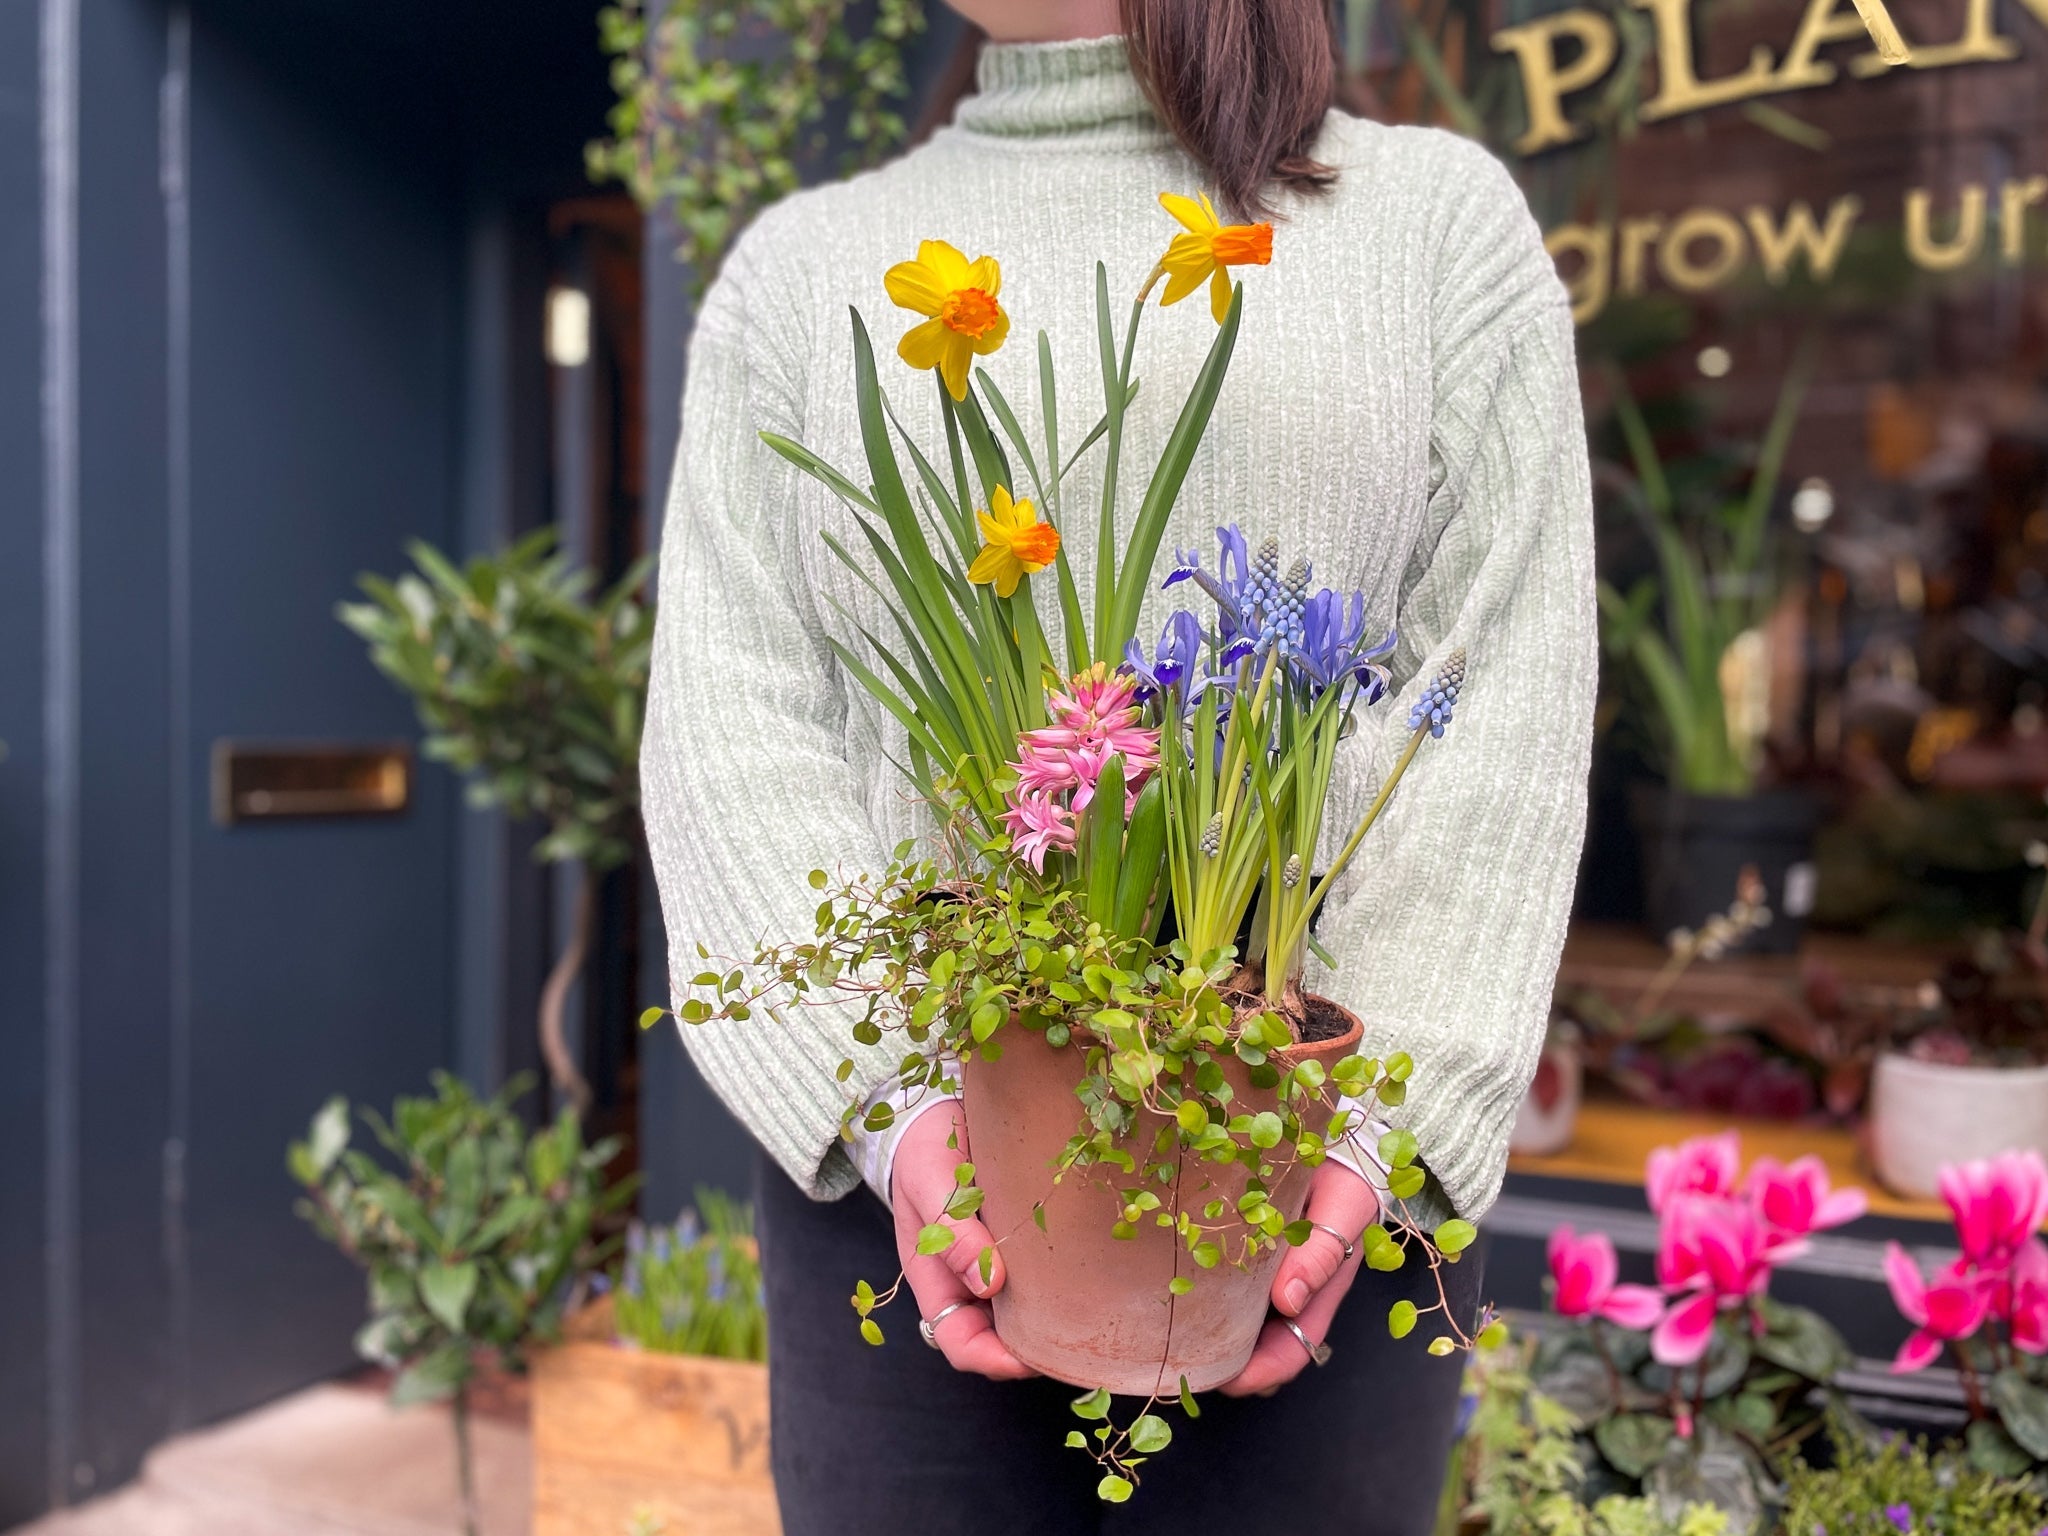 A girl holding a terracotta pot planted with Daffodils, Muscari and Muehlenbeckia